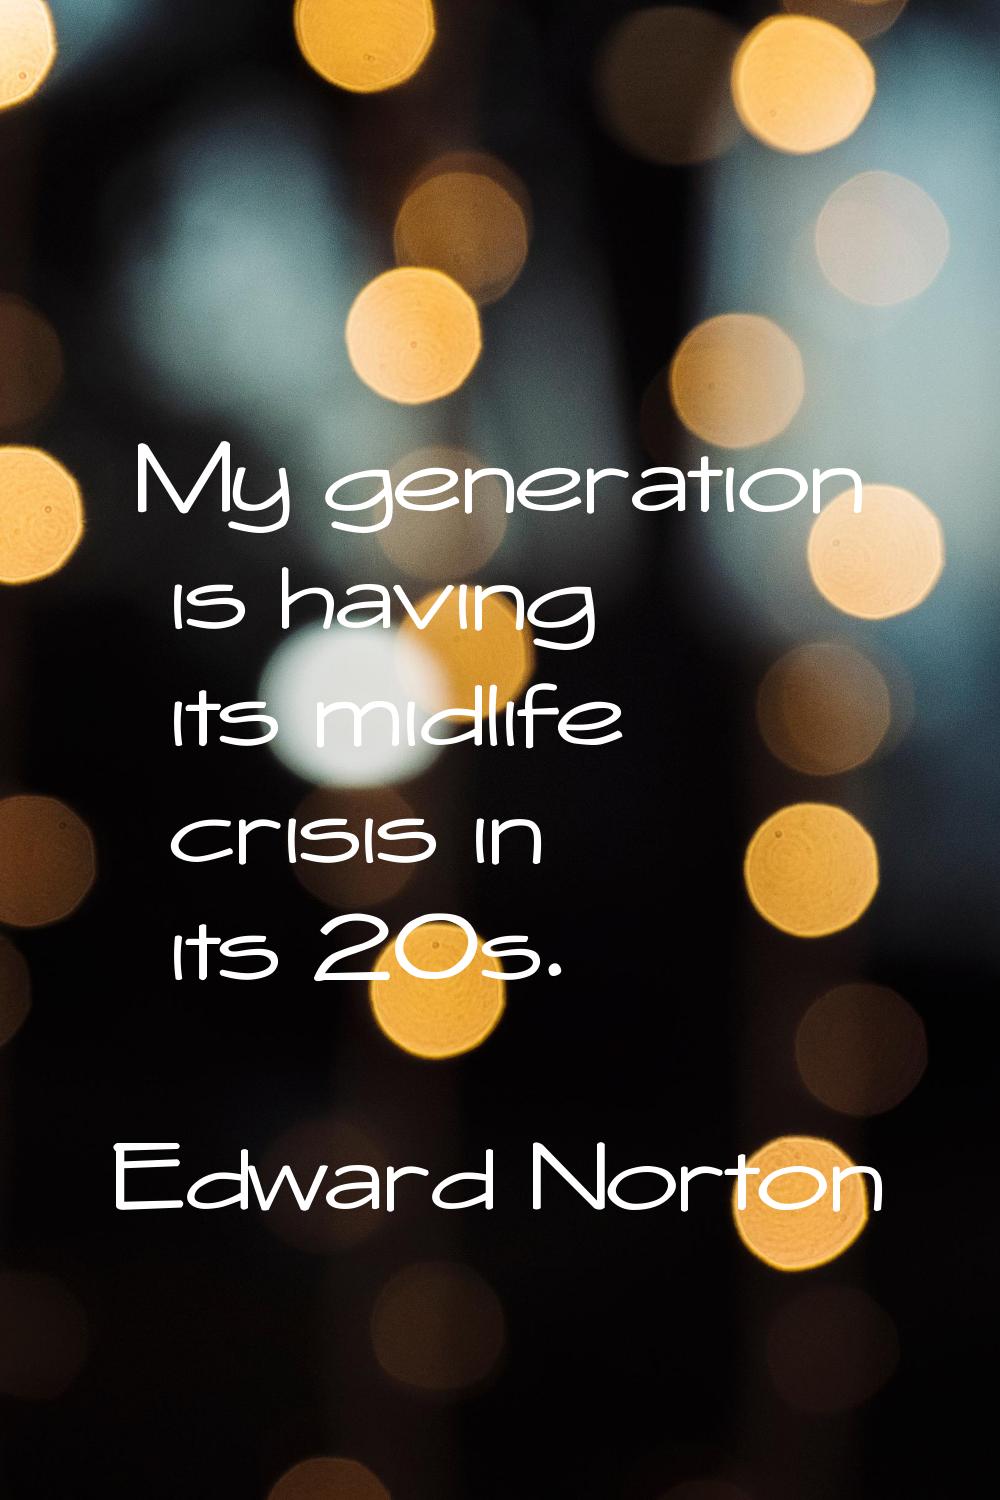 My generation is having its midlife crisis in its 20s.